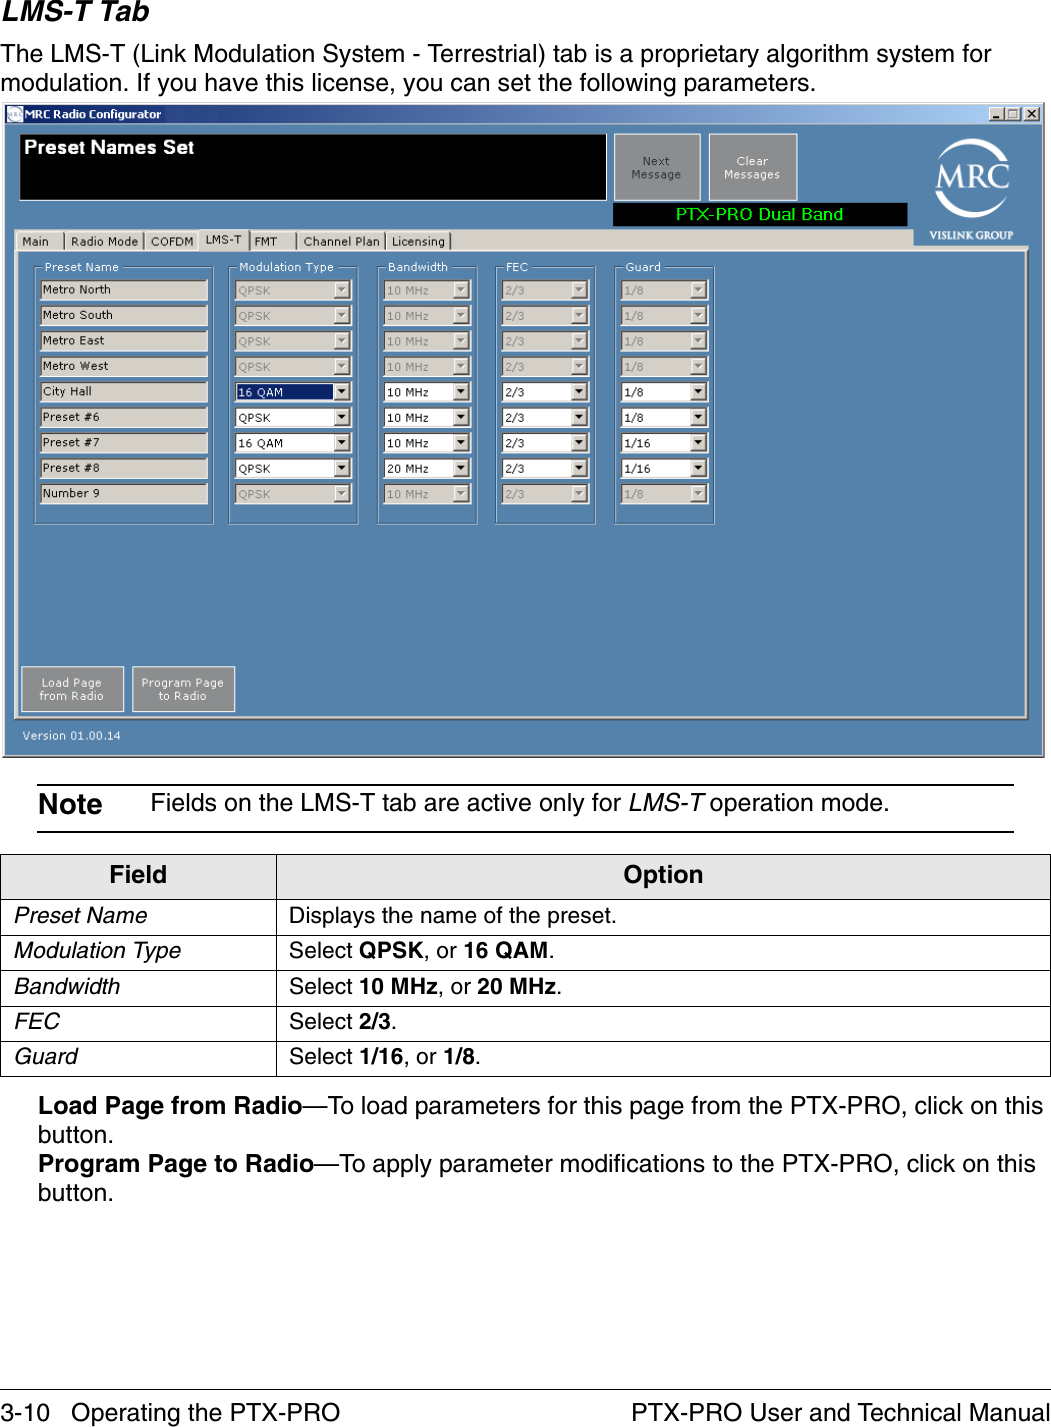 3-10   Operating the PTX-PRO PTX-PRO User and Technical ManualLMS-T TabThe LMS-T (Link Modulation System - Terrestrial) tab is a proprietary algorithm system for modulation. If you have this license, you can set the following parameters.Note Fields on the LMS-T tab are active only for LMS-T operation mode.Load Page from Radio—To load parameters for this page from the PTX-PRO, click on this button.Program Page to Radio—To apply parameter modifications to the PTX-PRO, click on this button.Field OptionPreset Name Displays the name of the preset.Modulation Type Select QPSK, or 16 QAM.Bandwidth Select 10 MHz, or 20 MHz.FEC Select 2/3.Guard Select 1/16, or 1/8.